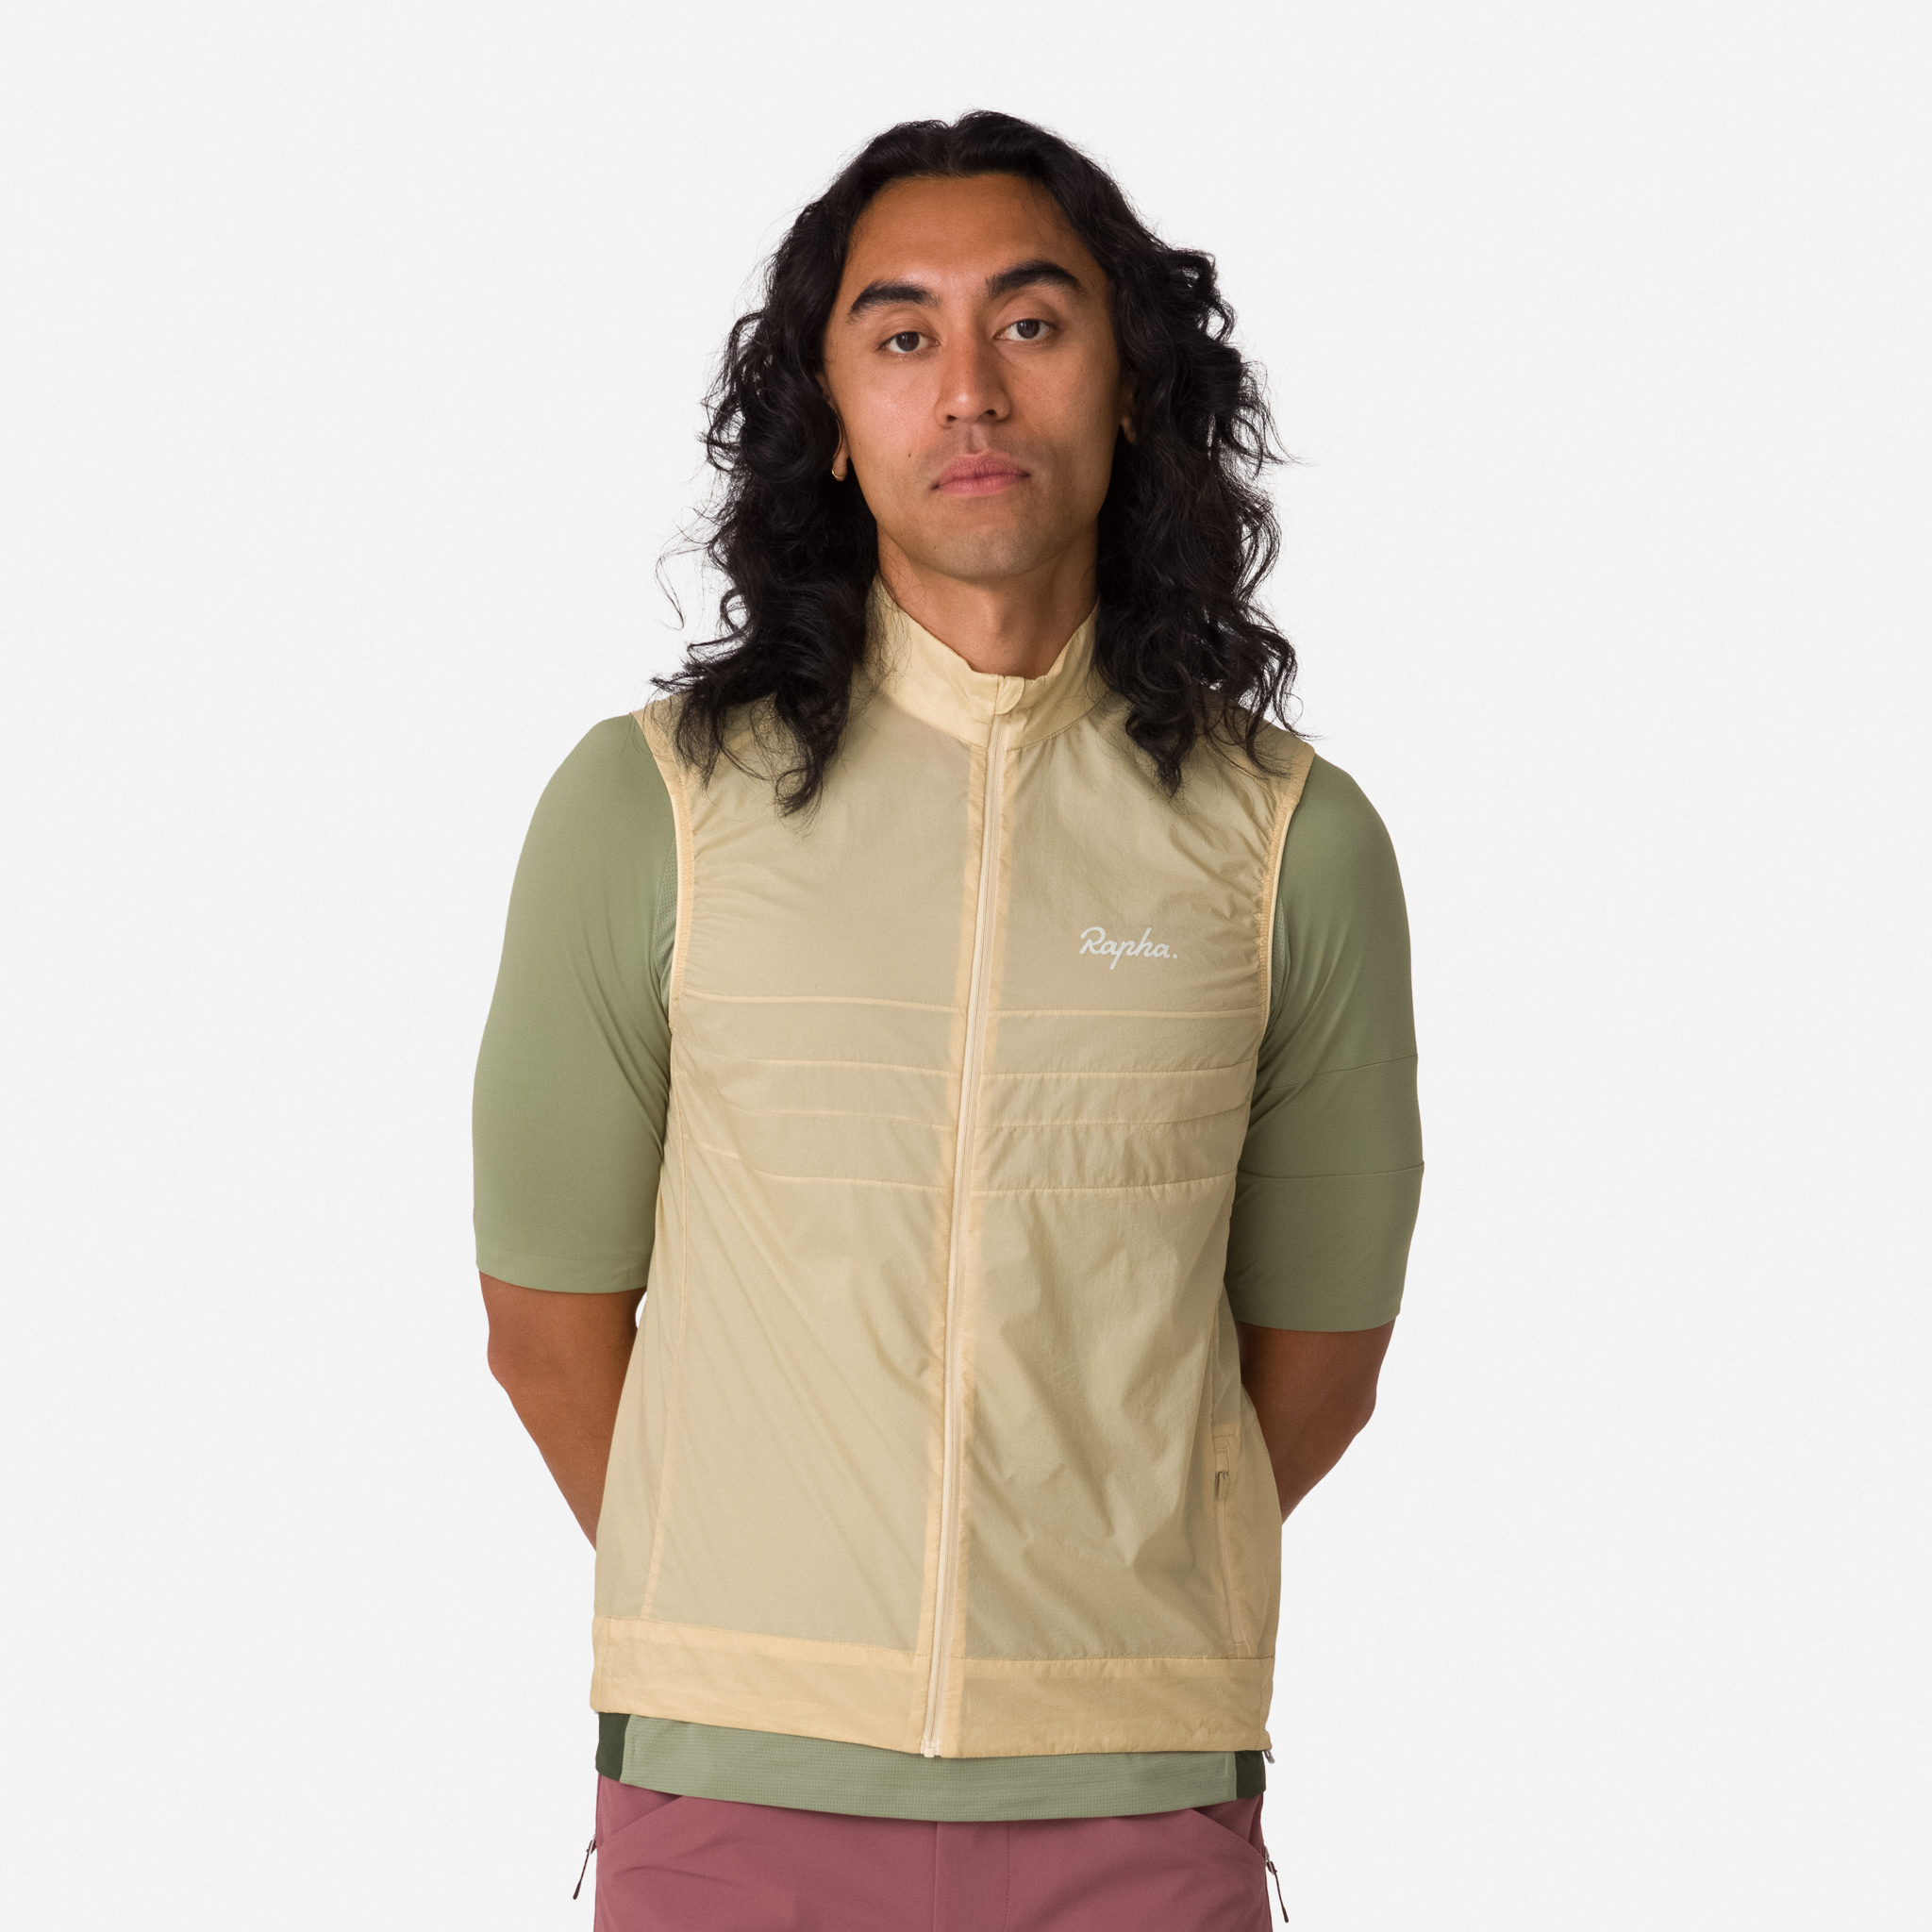 Men's Explore Lightweight Gilet for Spring Cycling | Rapha